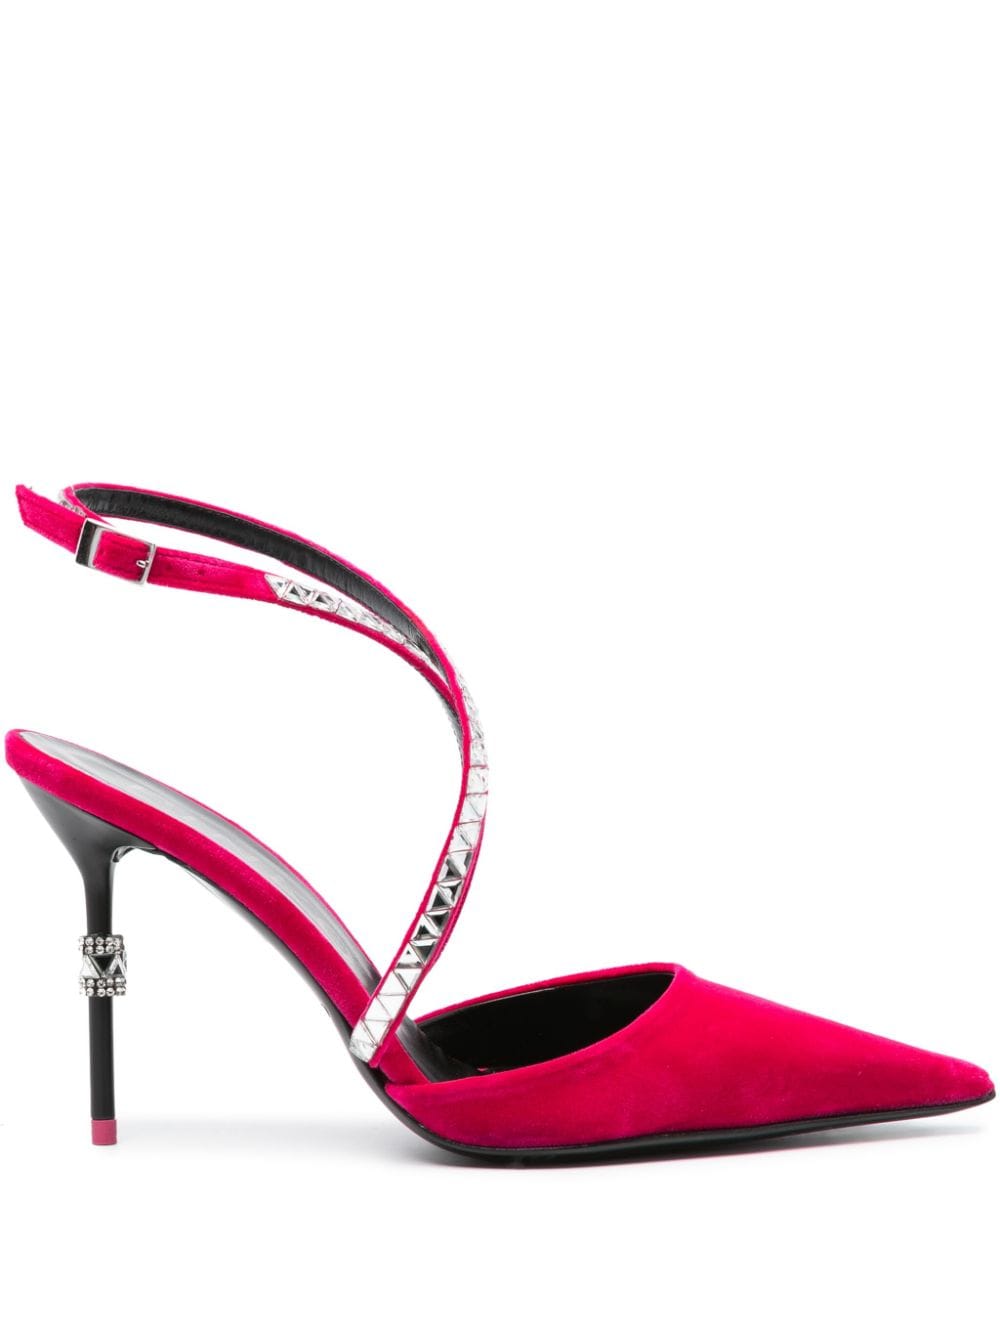 Pinko 90mm Leather Slingback Pumps In Beetroot